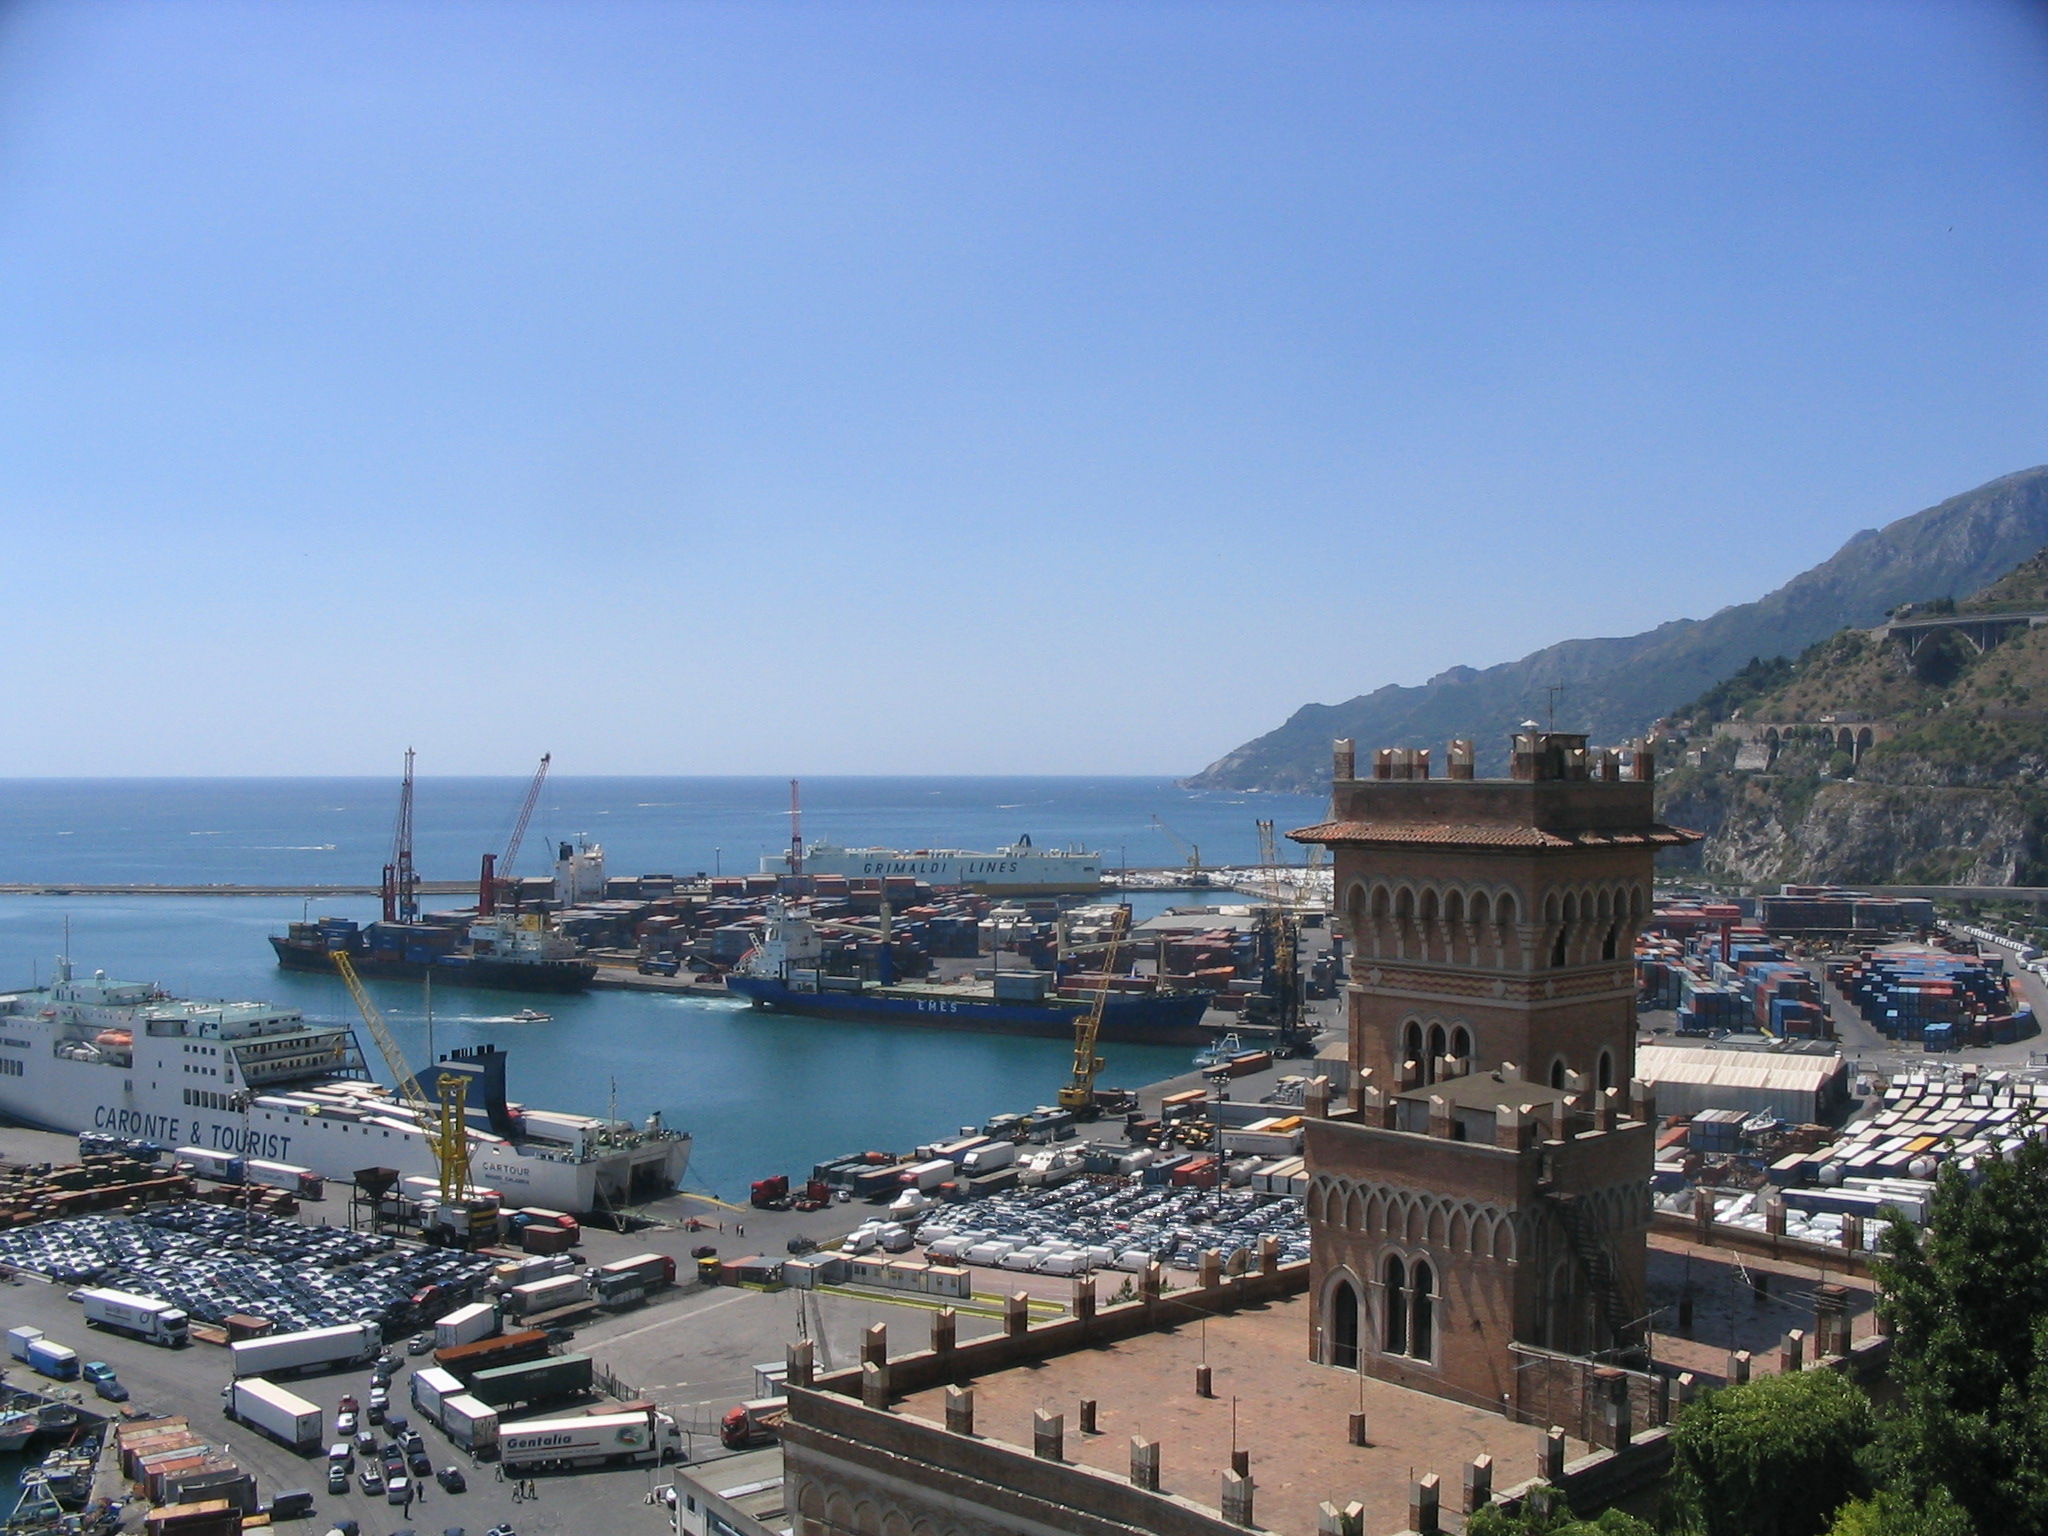 Image of the ferry terminal in Salerno